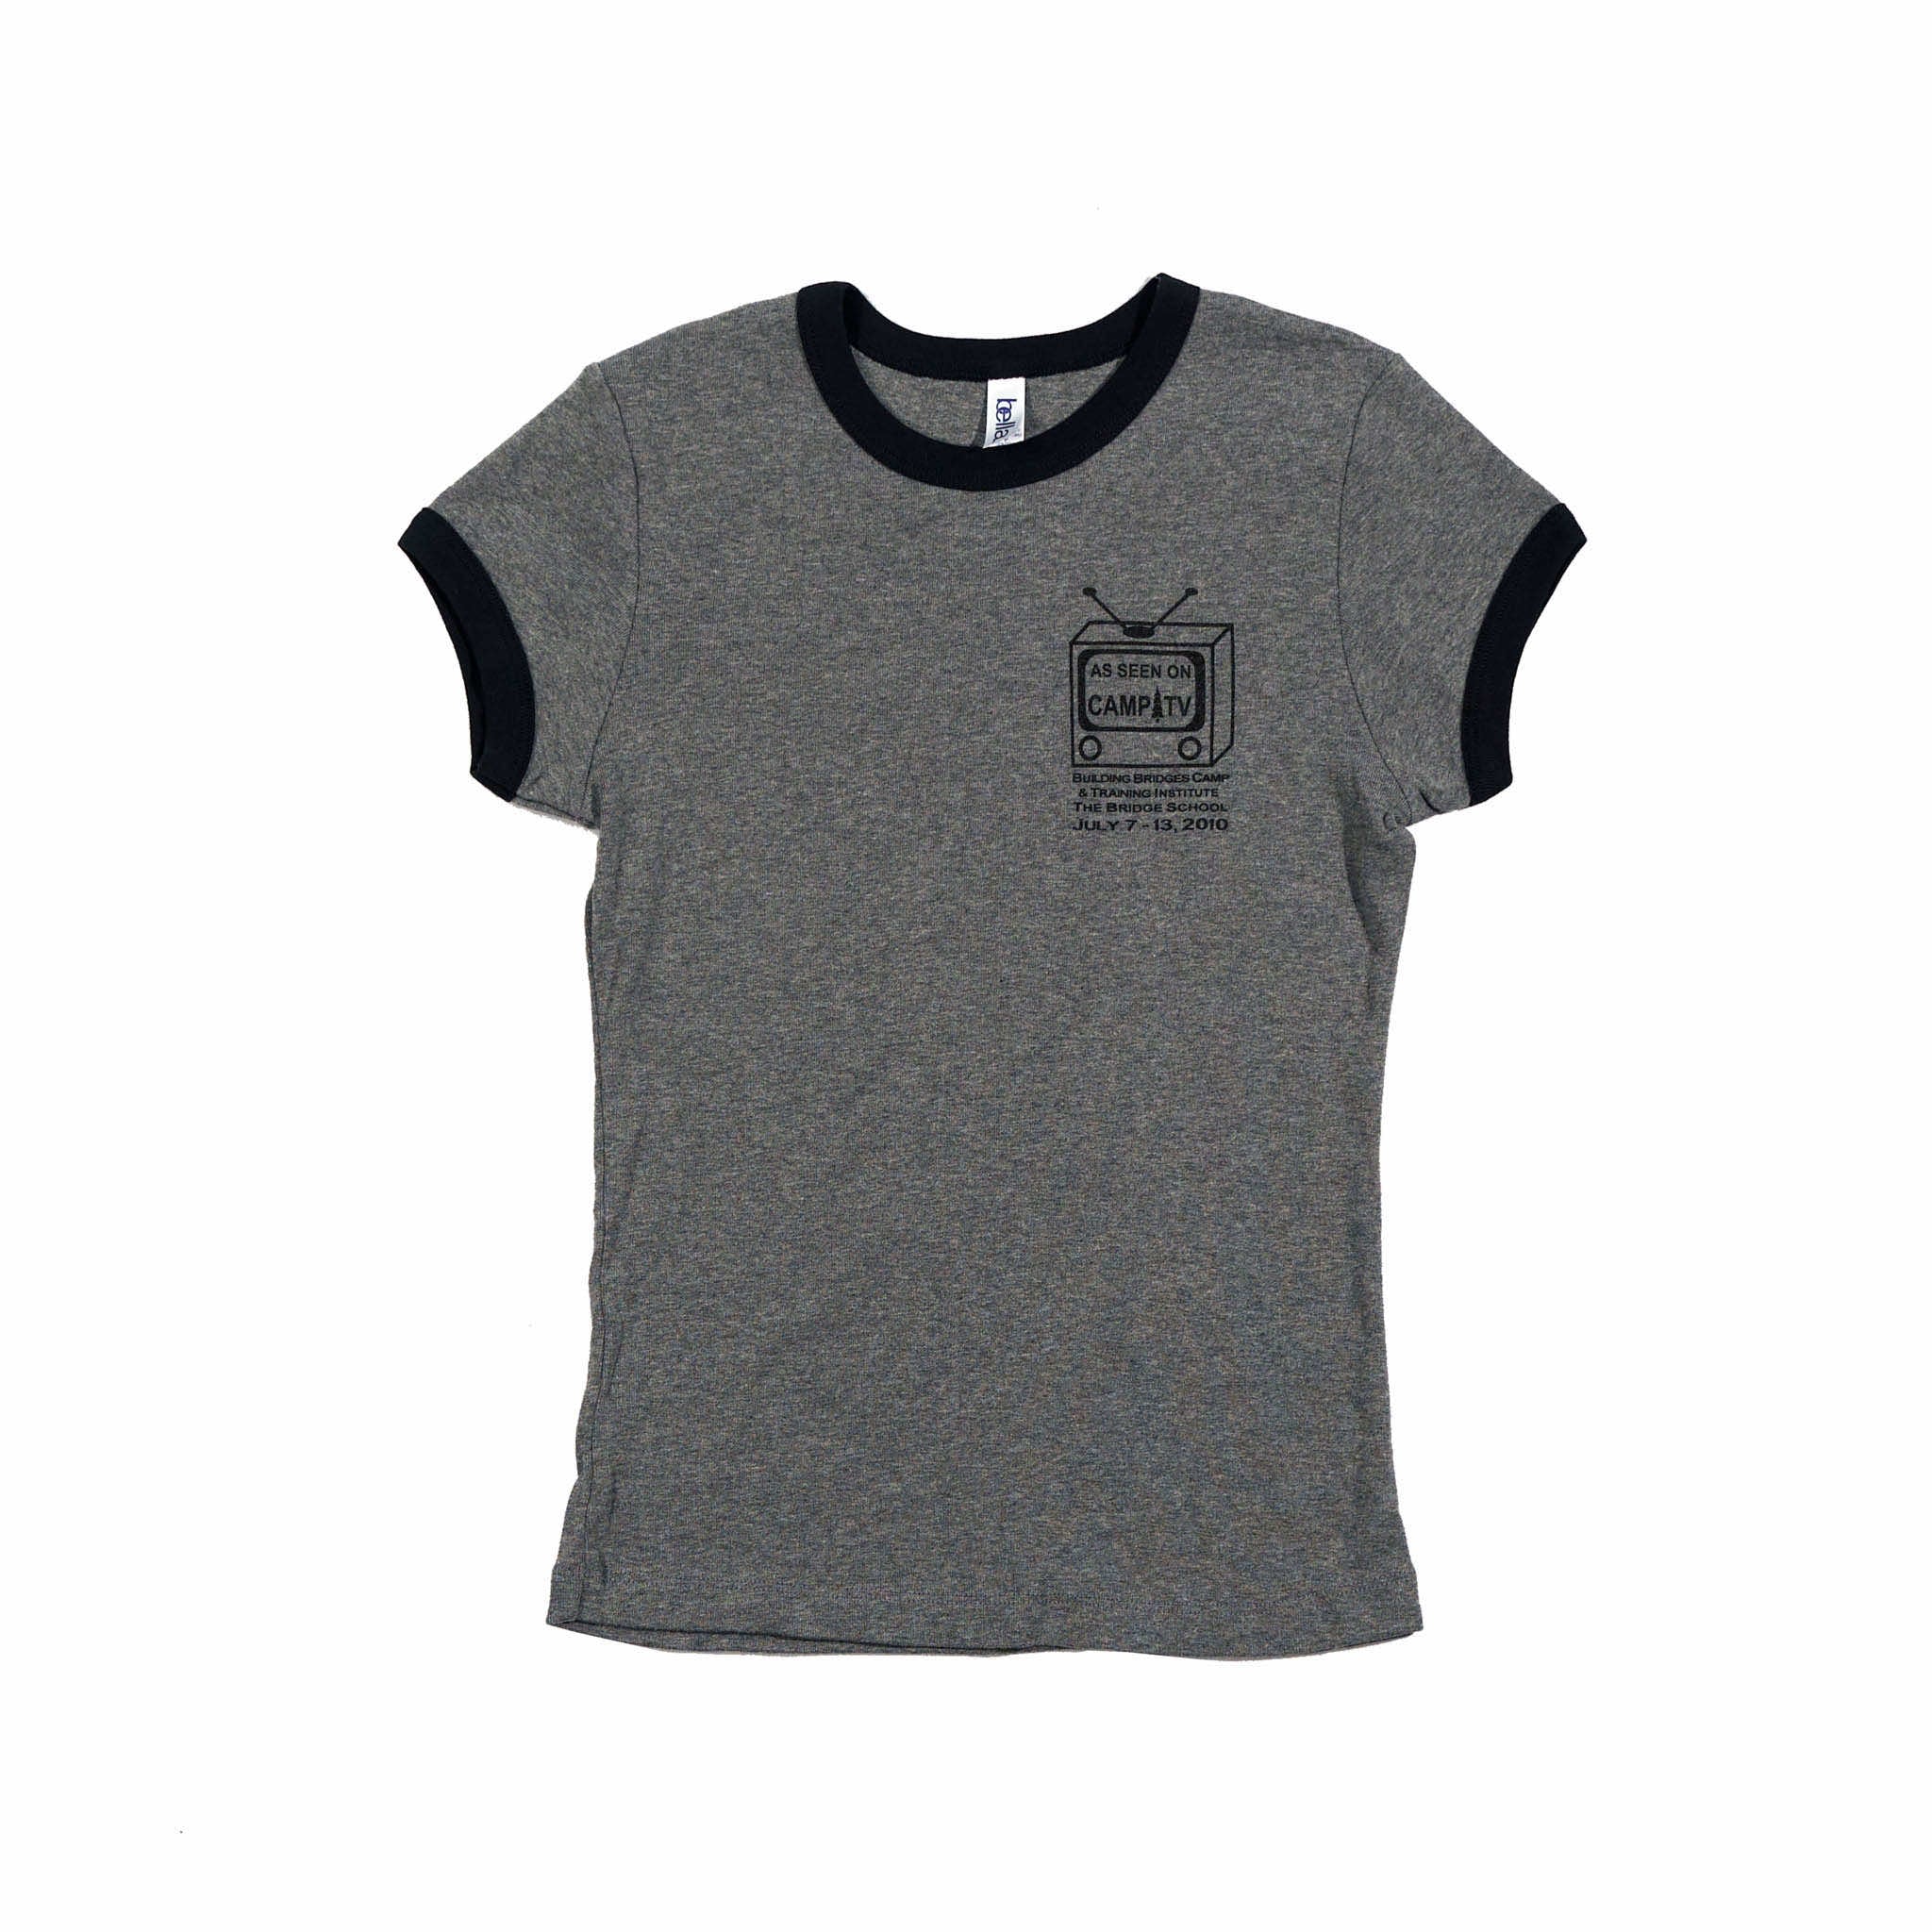 Camp Youth Girls Ringer Tee